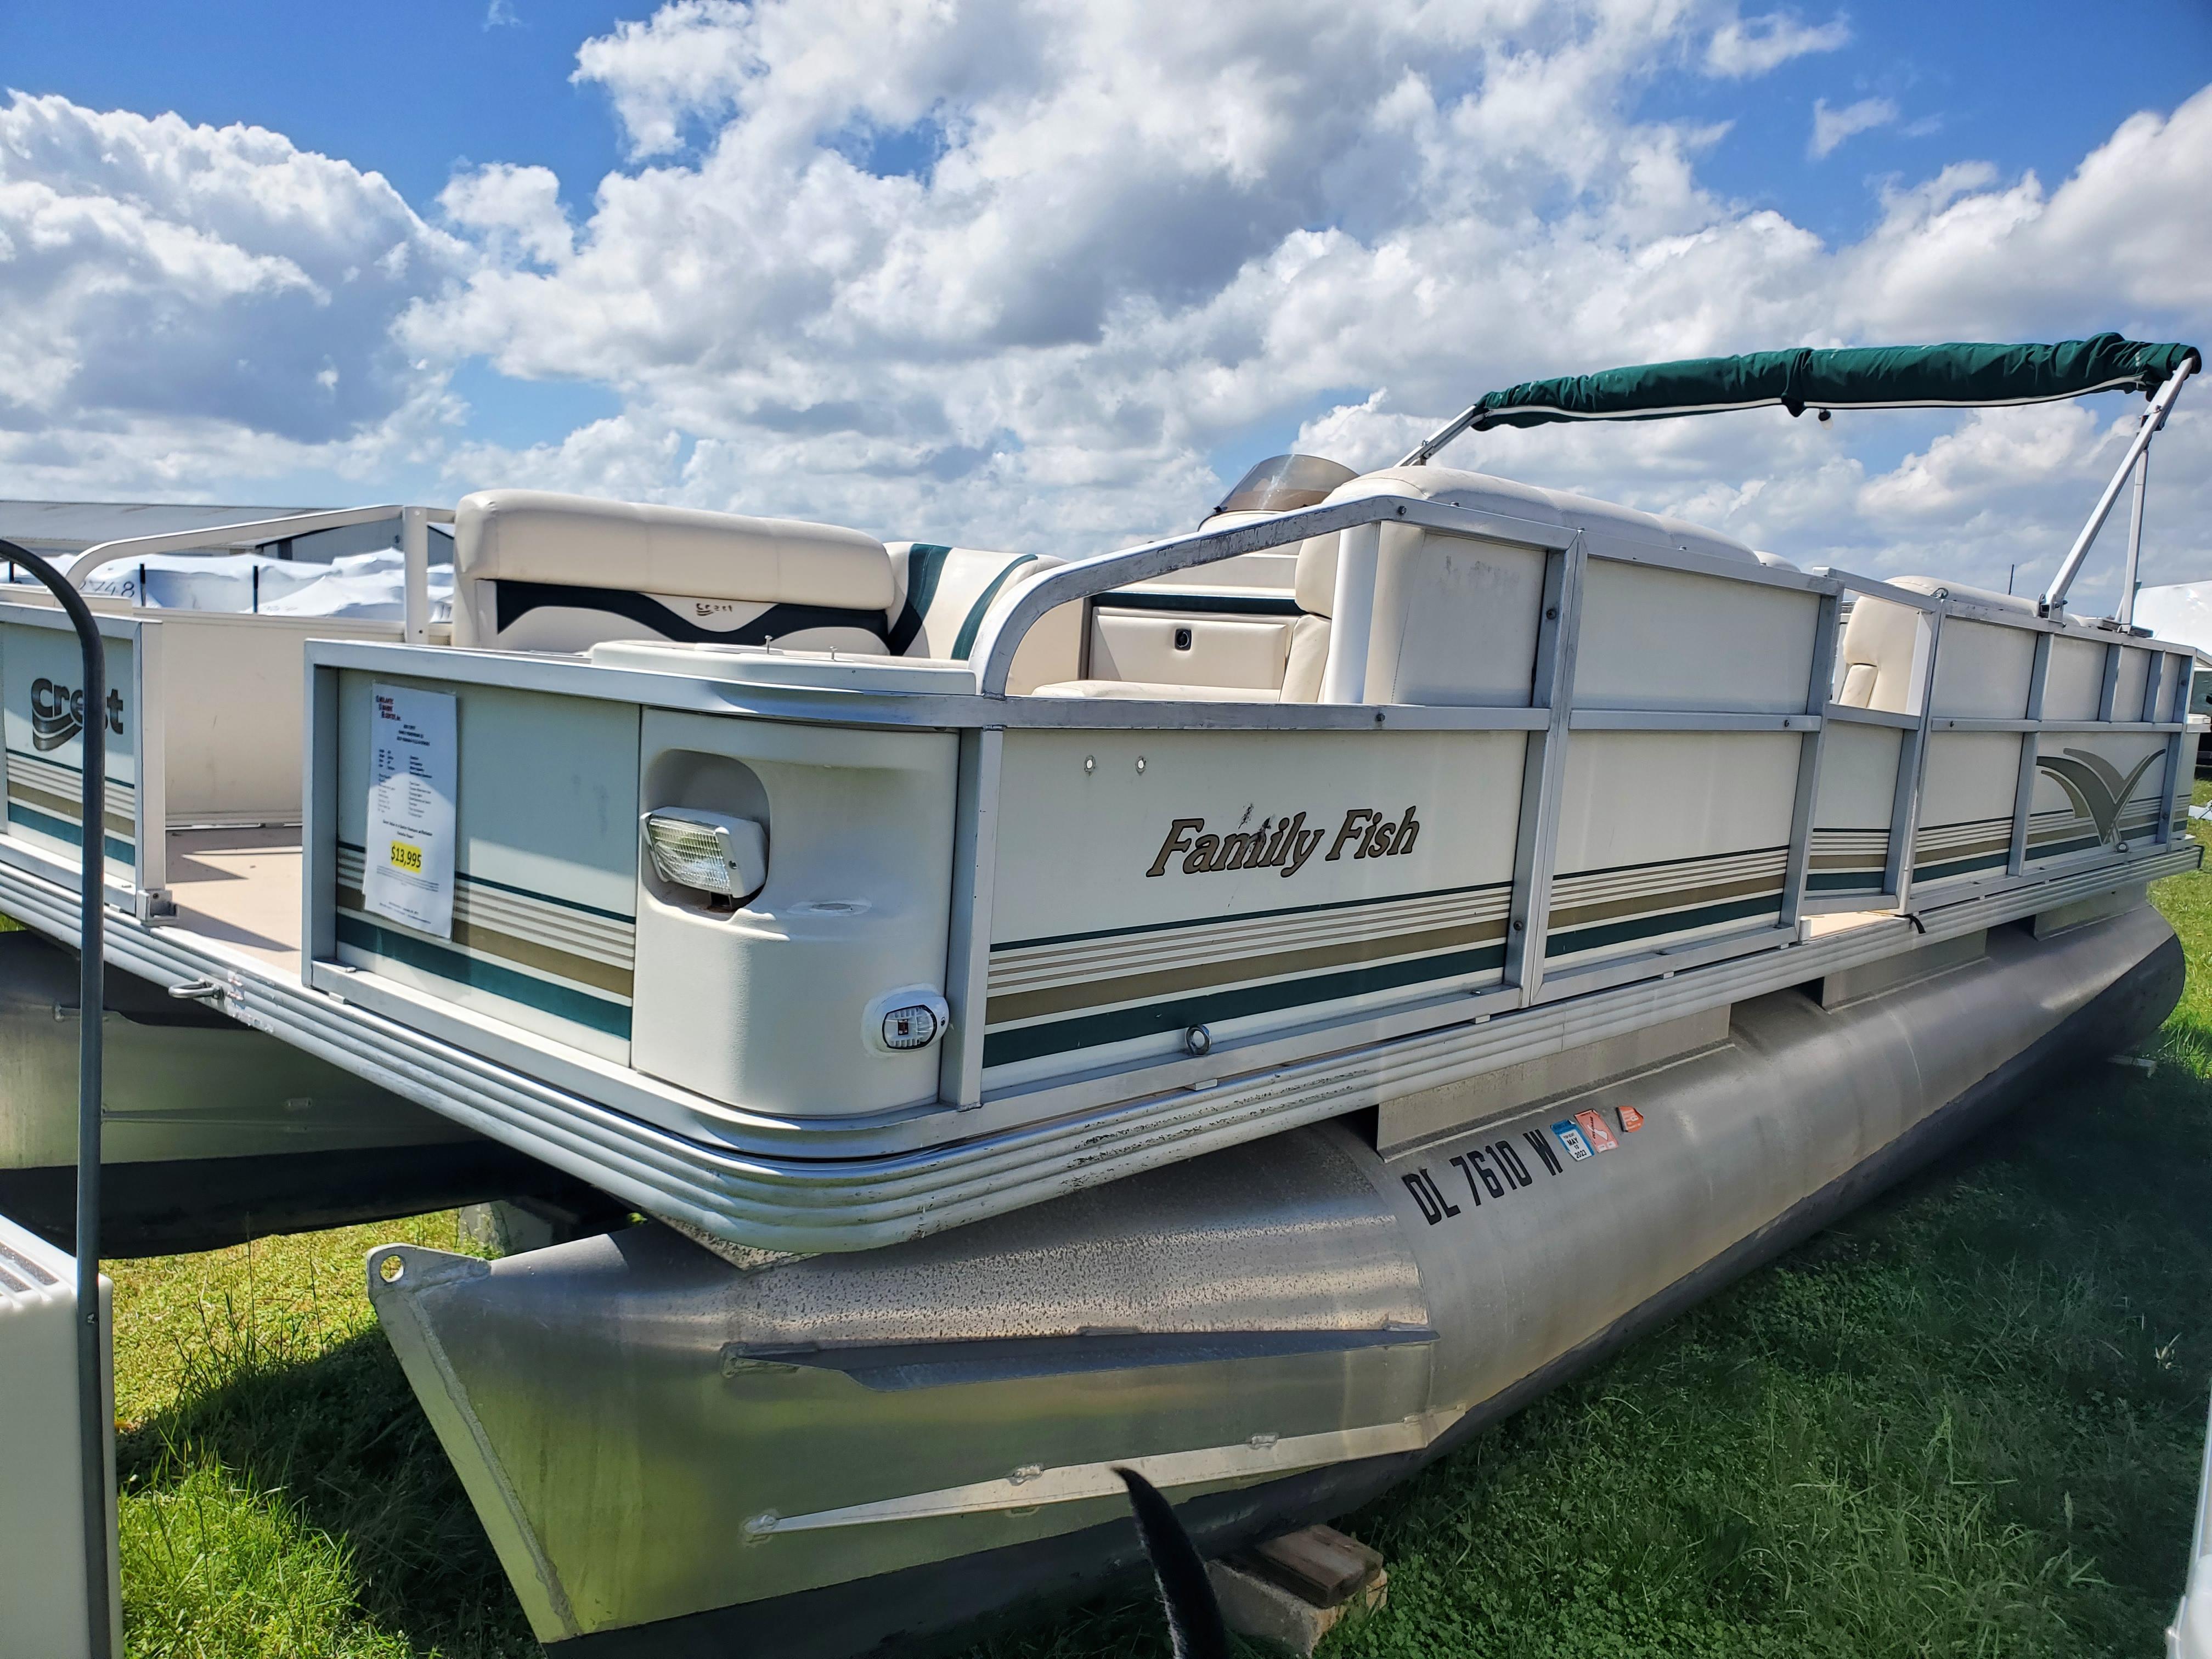 Used Pontoon Boats for Sale by Owner, PontoonsOnly